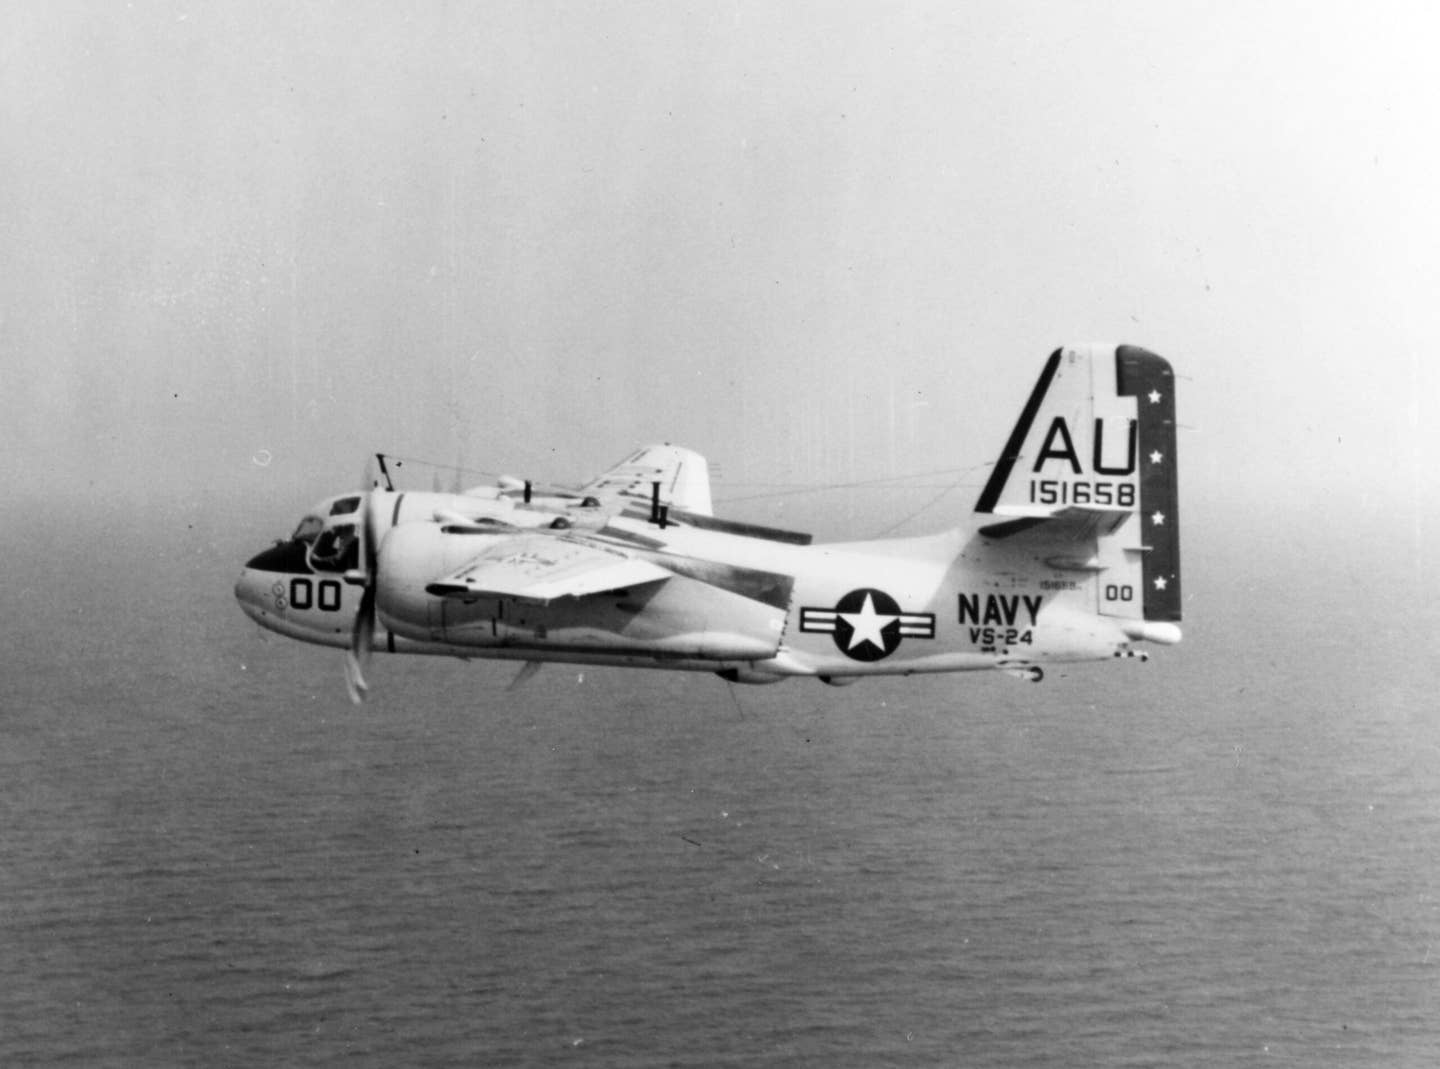 An S-2E&nbsp;Tracker&nbsp;of VS-24 in flight, in around 1970. The squadron was assigned to <a href="https://www.seaforces.org/usnair/CVW/CVSG-56.htm">CVSG-56</a> aboard the USS <em>Intrepid</em> (CVS-11). This particular aircraft was later transferred to Taiwan. <em>USN</em>